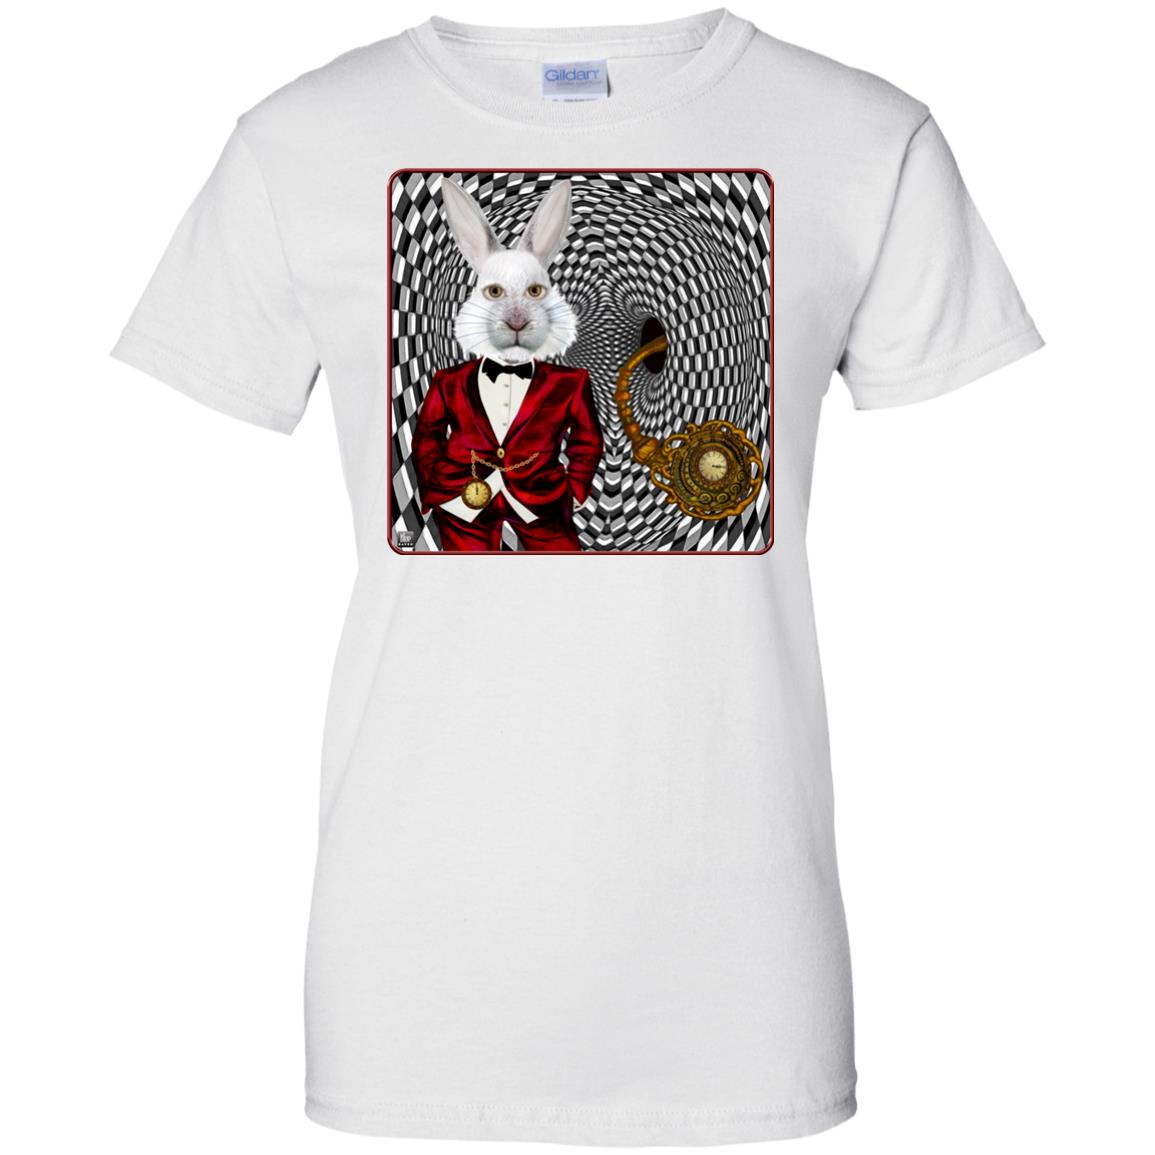 portrait of the white rabbit - Women's Relaxed Fit T-Shirt